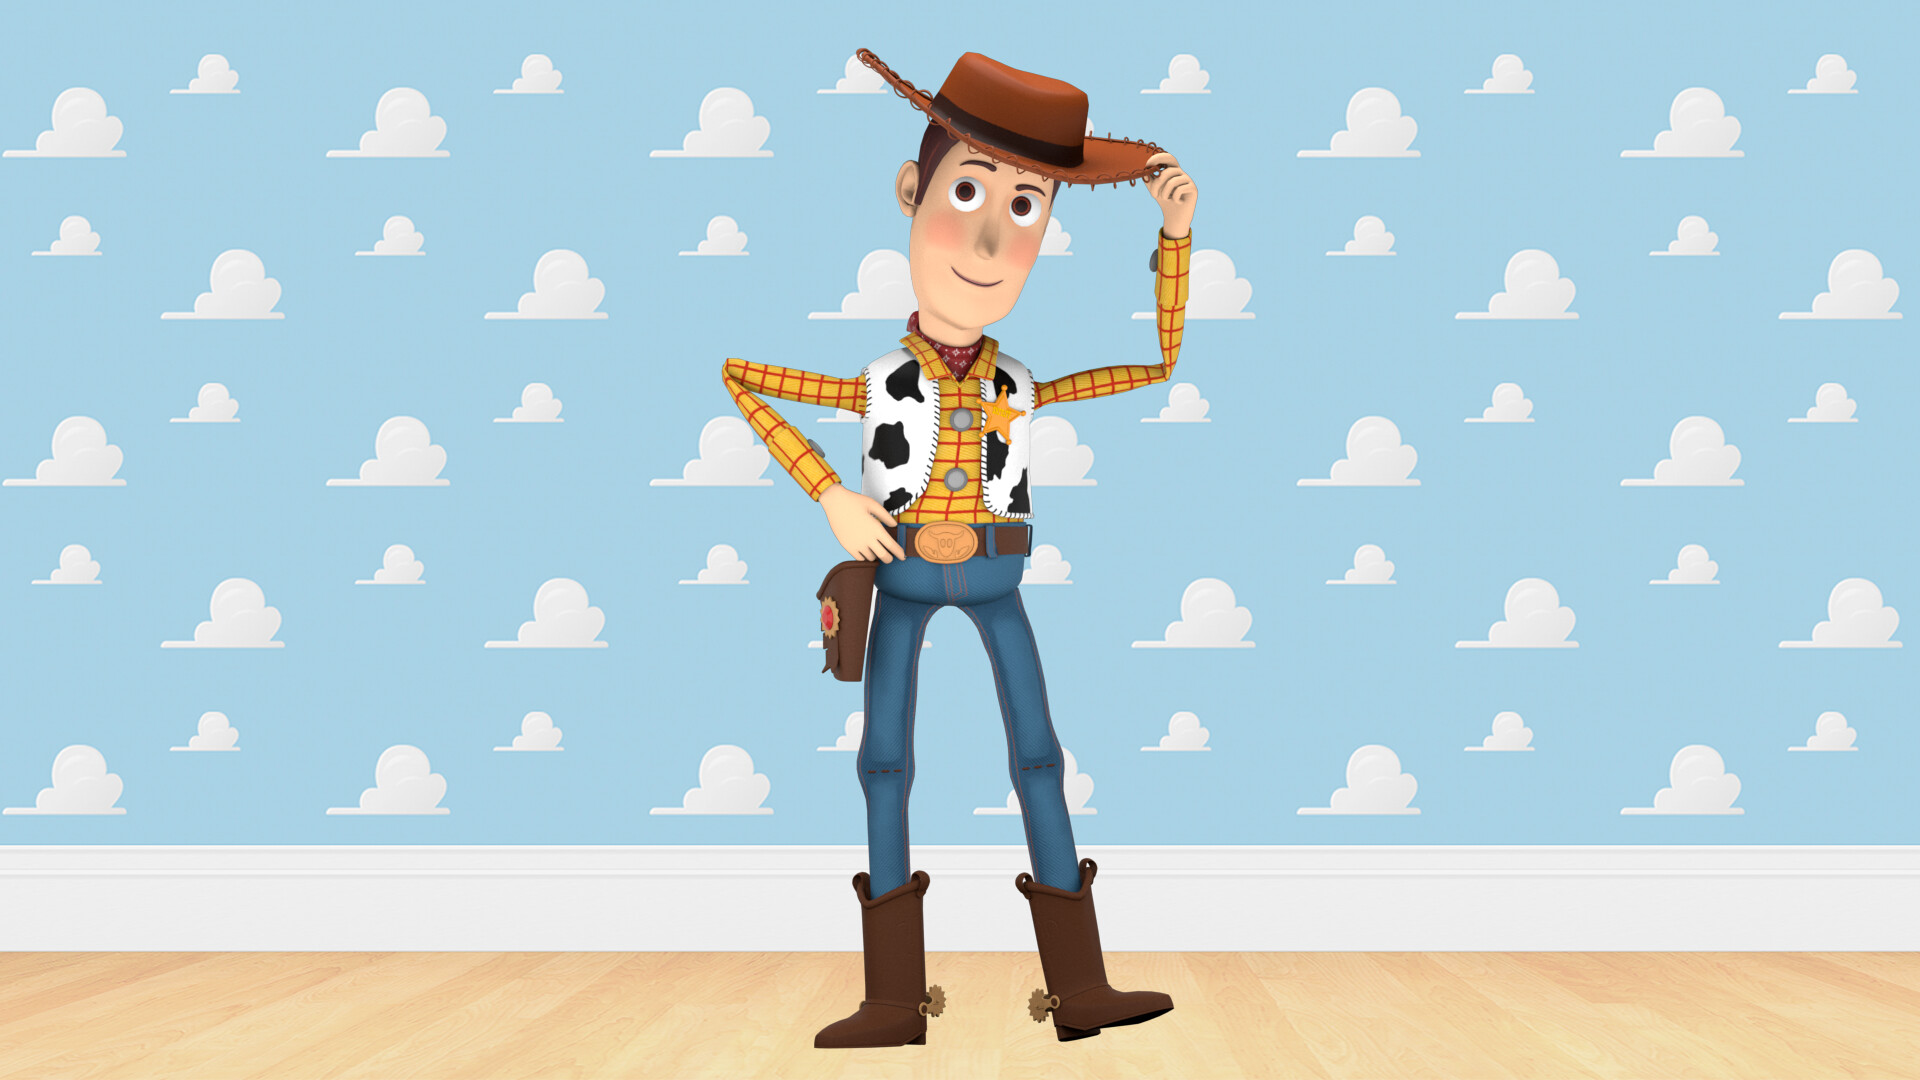 Toy Story Woody Background